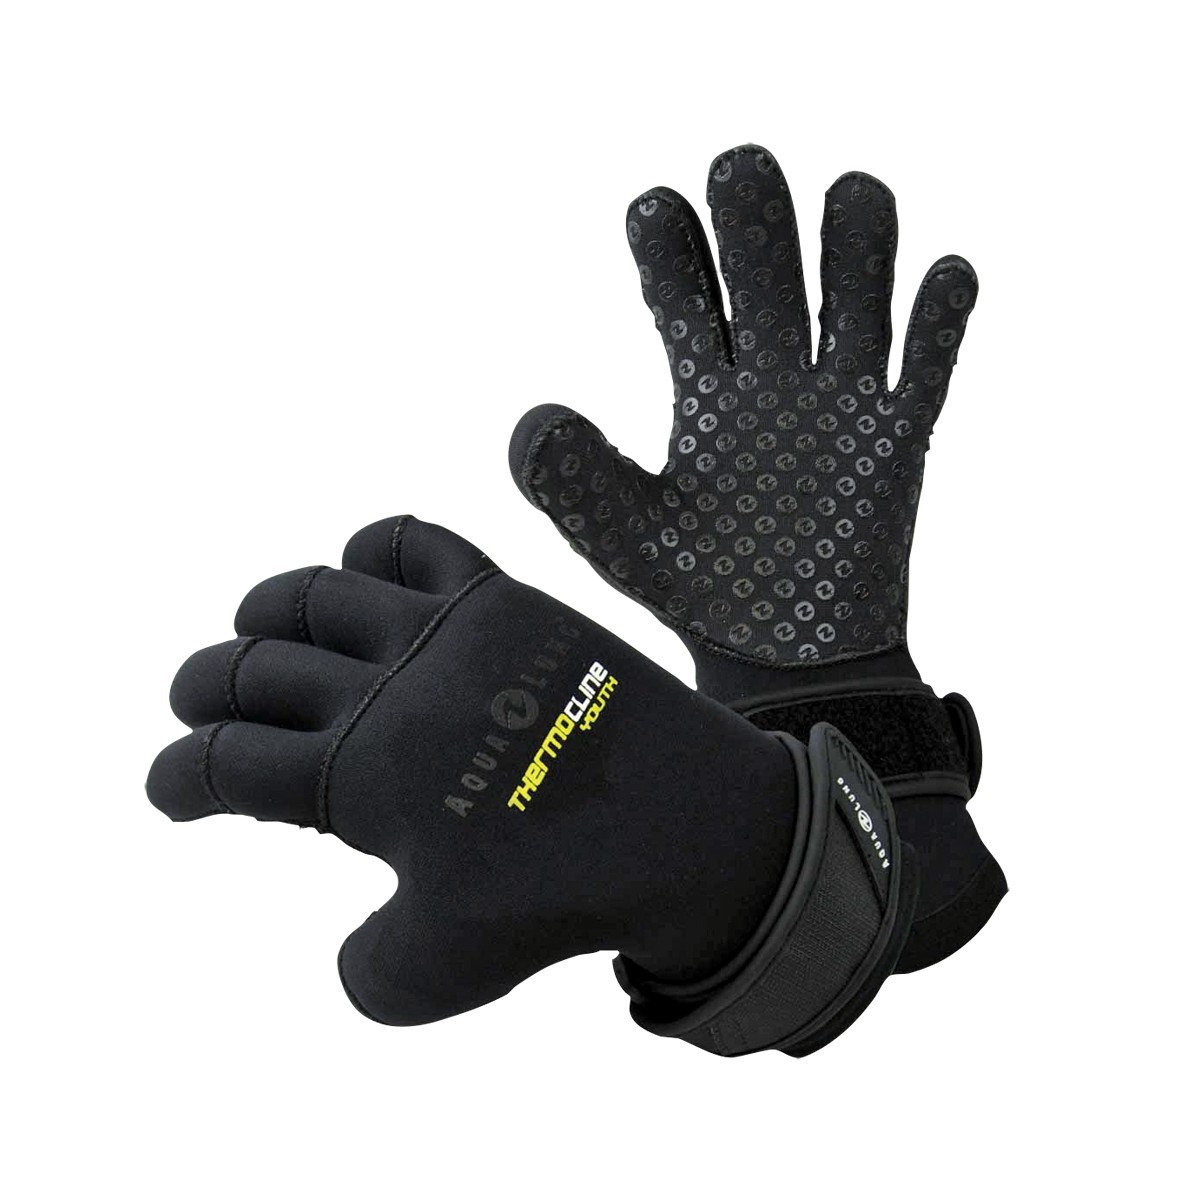 Aqua Lung 5mm Thermocline Youth Glove